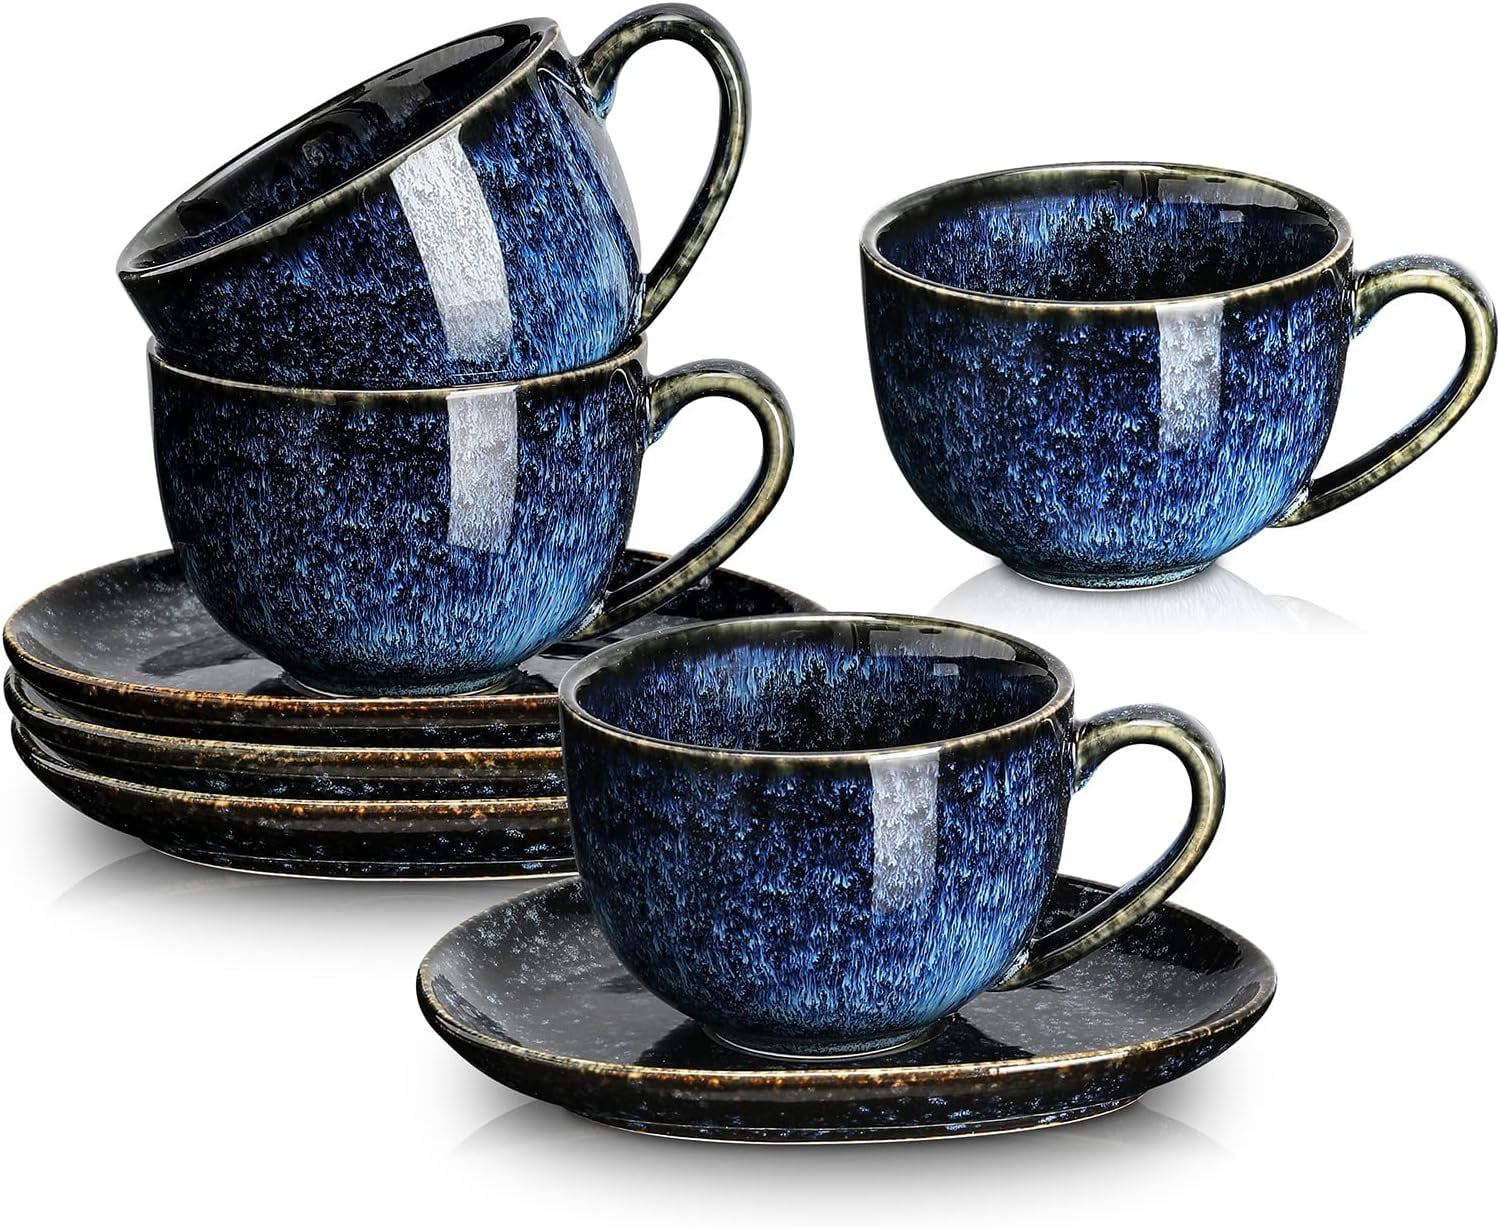 [JOEFREX] Porcelain Cappuccino Cups with Saucers Italian Style- 6.5 Ounce  for Specialty Coffee Drink…See more [JOEFREX] Porcelain Cappuccino Cups  with